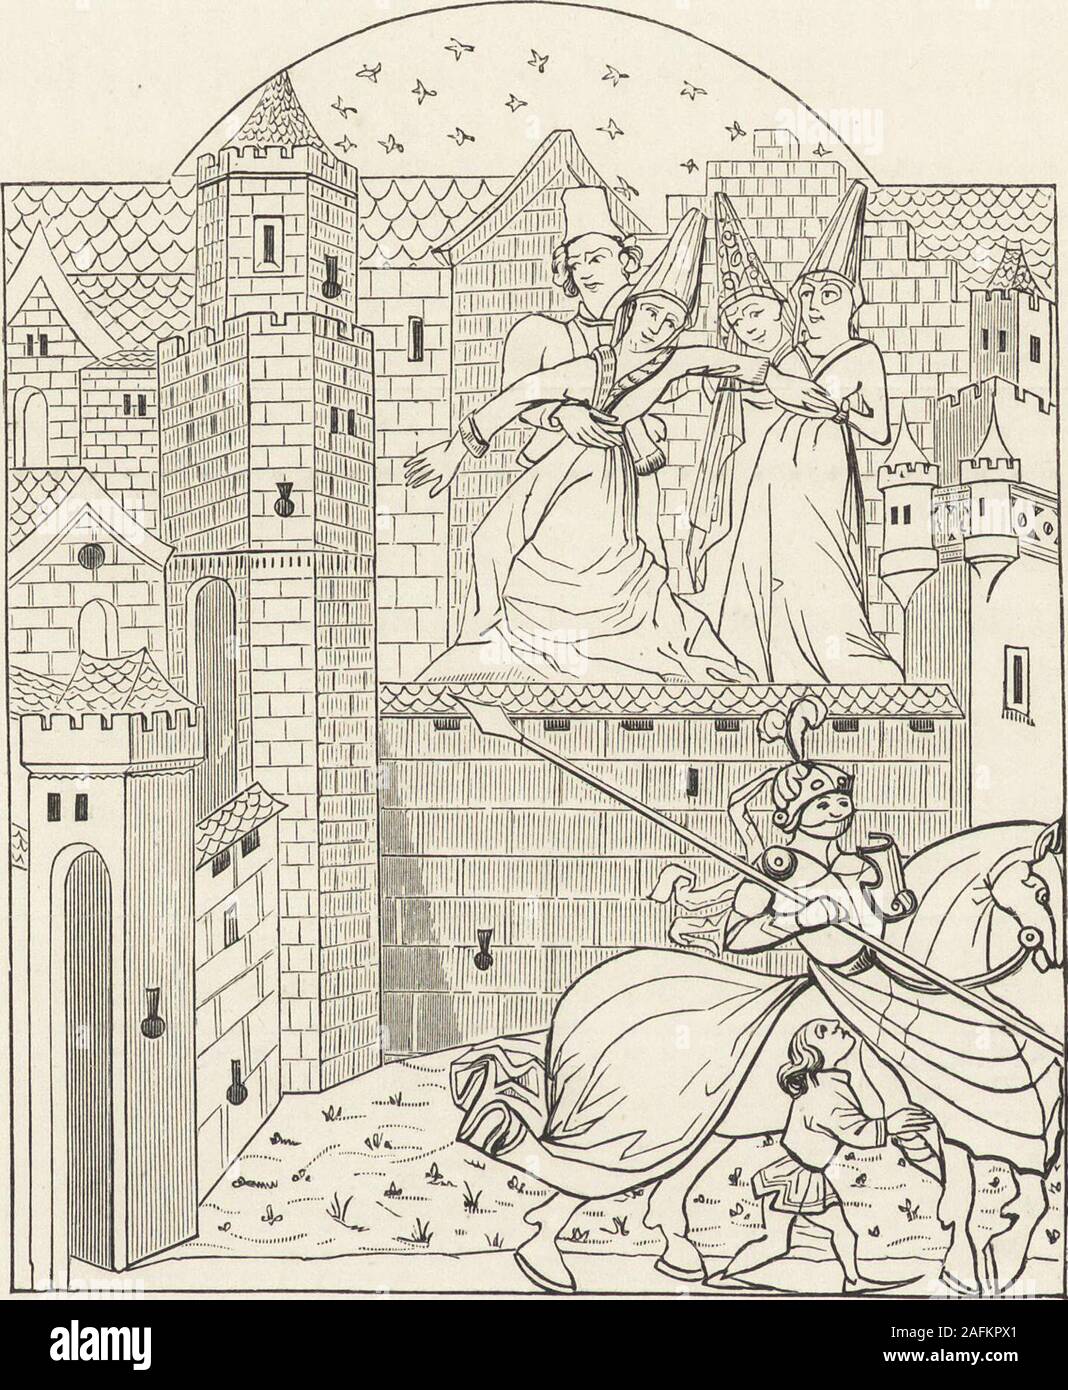 . Military and religious life in the Middle Ages and at the period of the Renaissance. e Count of Artois, who has come from Arras to take part in the tournament atBoulogne, presents himself at the Castle of the Count of Boulogne, and is received by theCountess and her daughter.—Fac-simile of a Miniature in the Livre du tres-chevalereuxComte dArtois et de sa Femme, Barrois Manuscript (Fifteenth Century). duties instilled into each youthful aspirant, it must be owned that theeducation received by the former was one calculated to make them in everyway worthy of such homage. To fit ladies for the Stock Photo